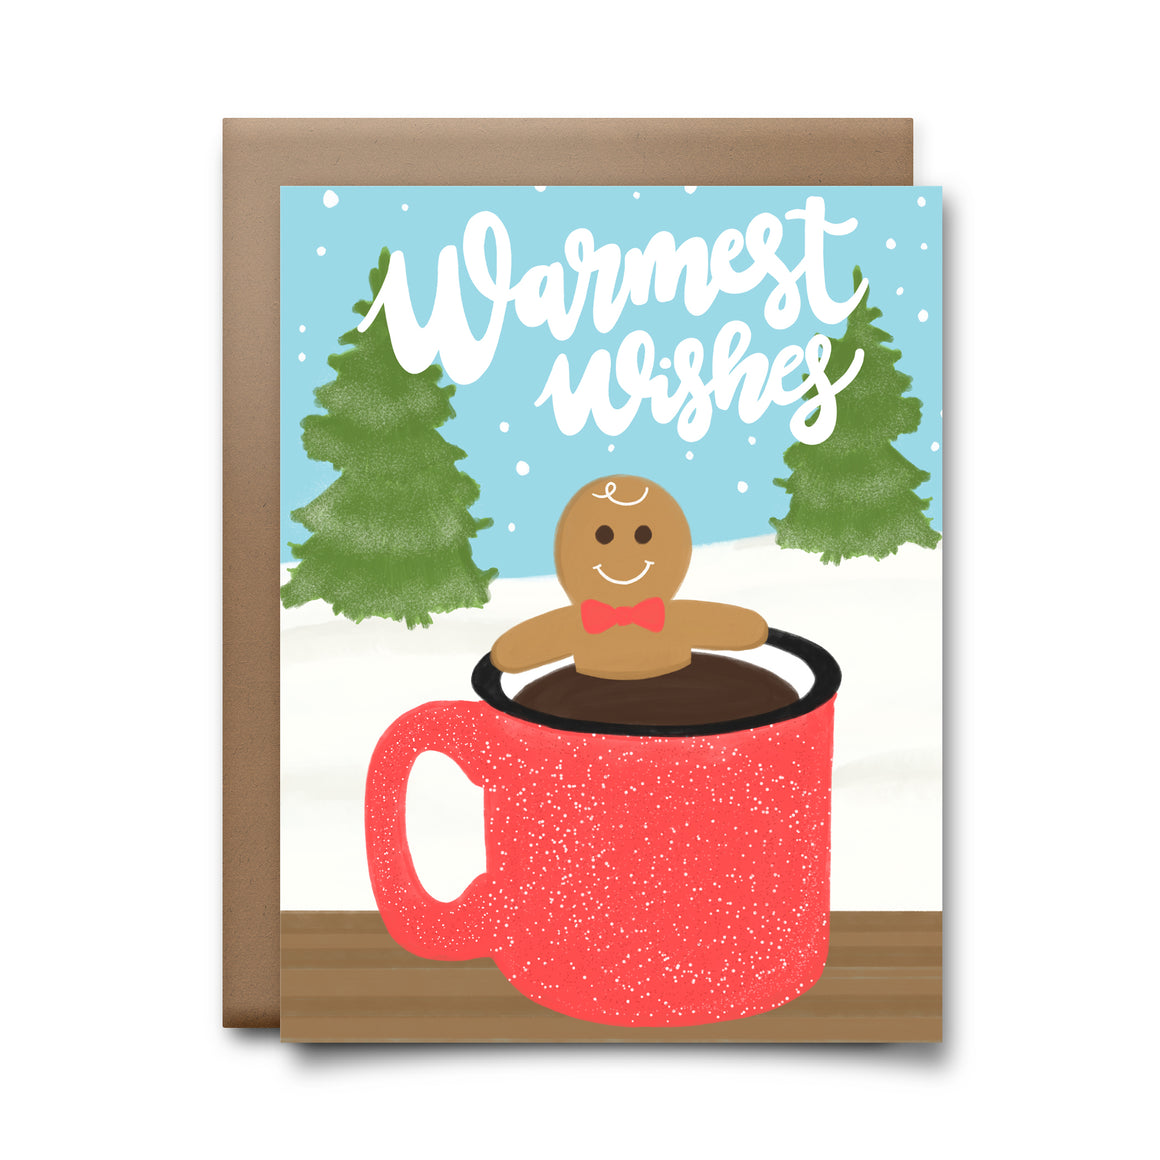 warmest wishes | greeting card